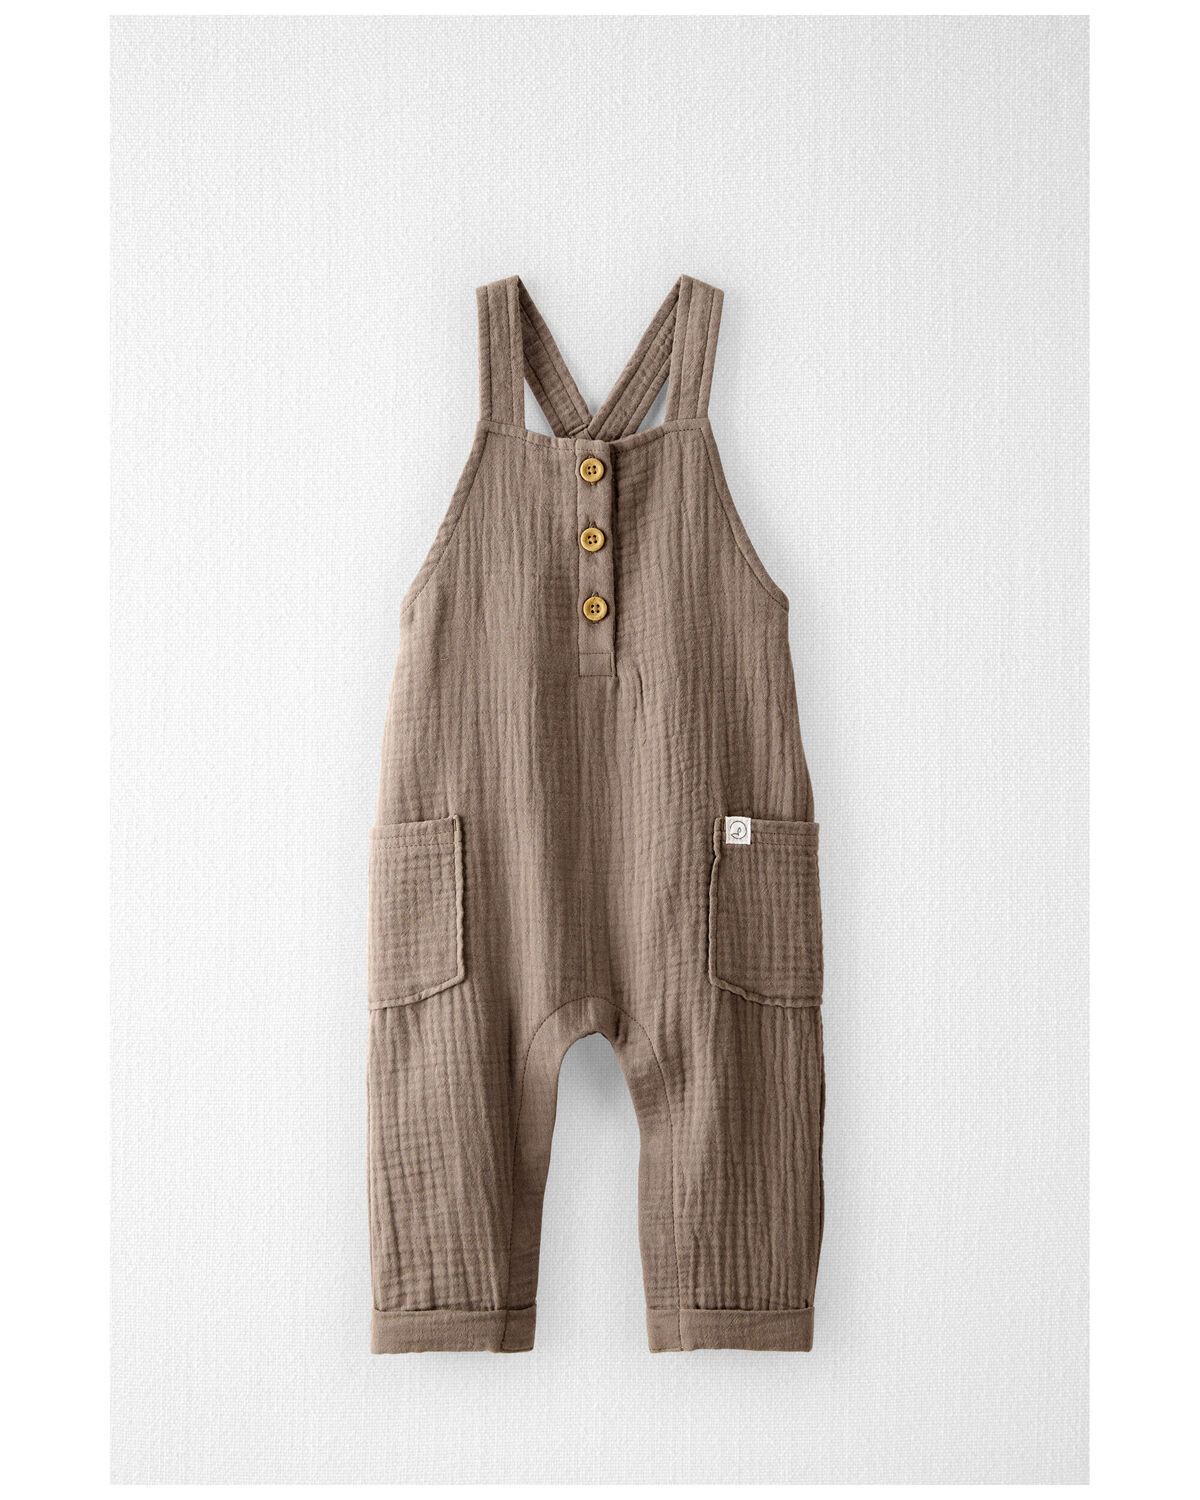 Happy Otter Baby Organic Cotton Gauze Overalls in Taupe | carters.com | Carter's